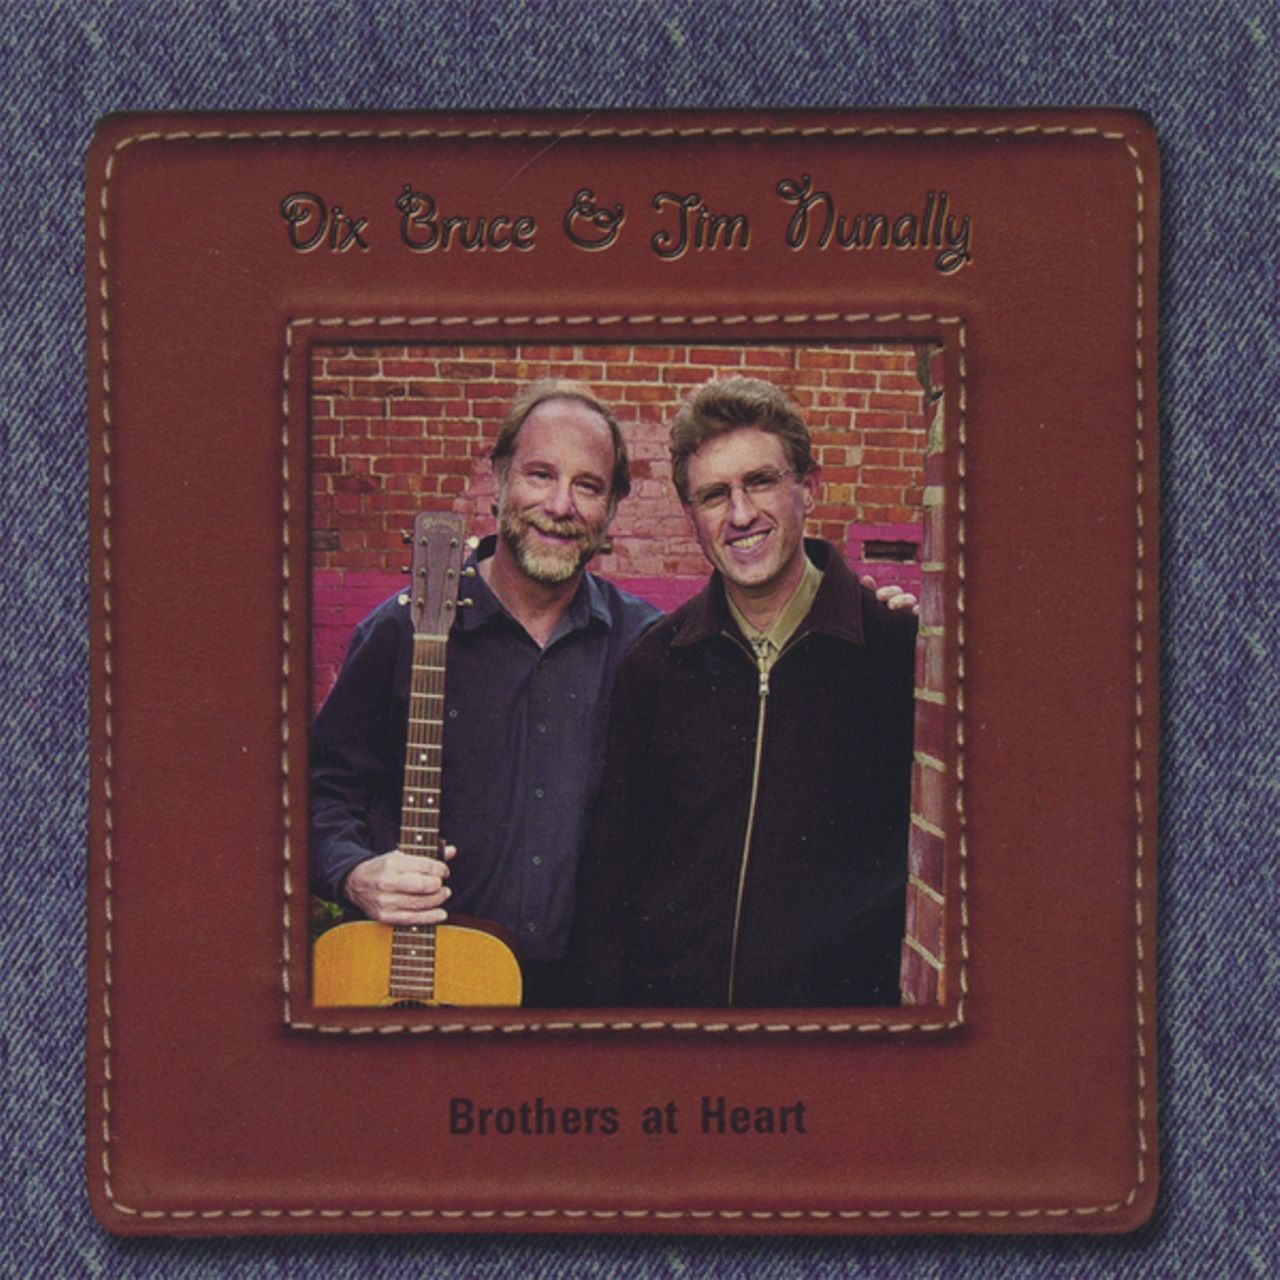 Dix Bruce & Jim Nunally - Brothers At Heart cover album